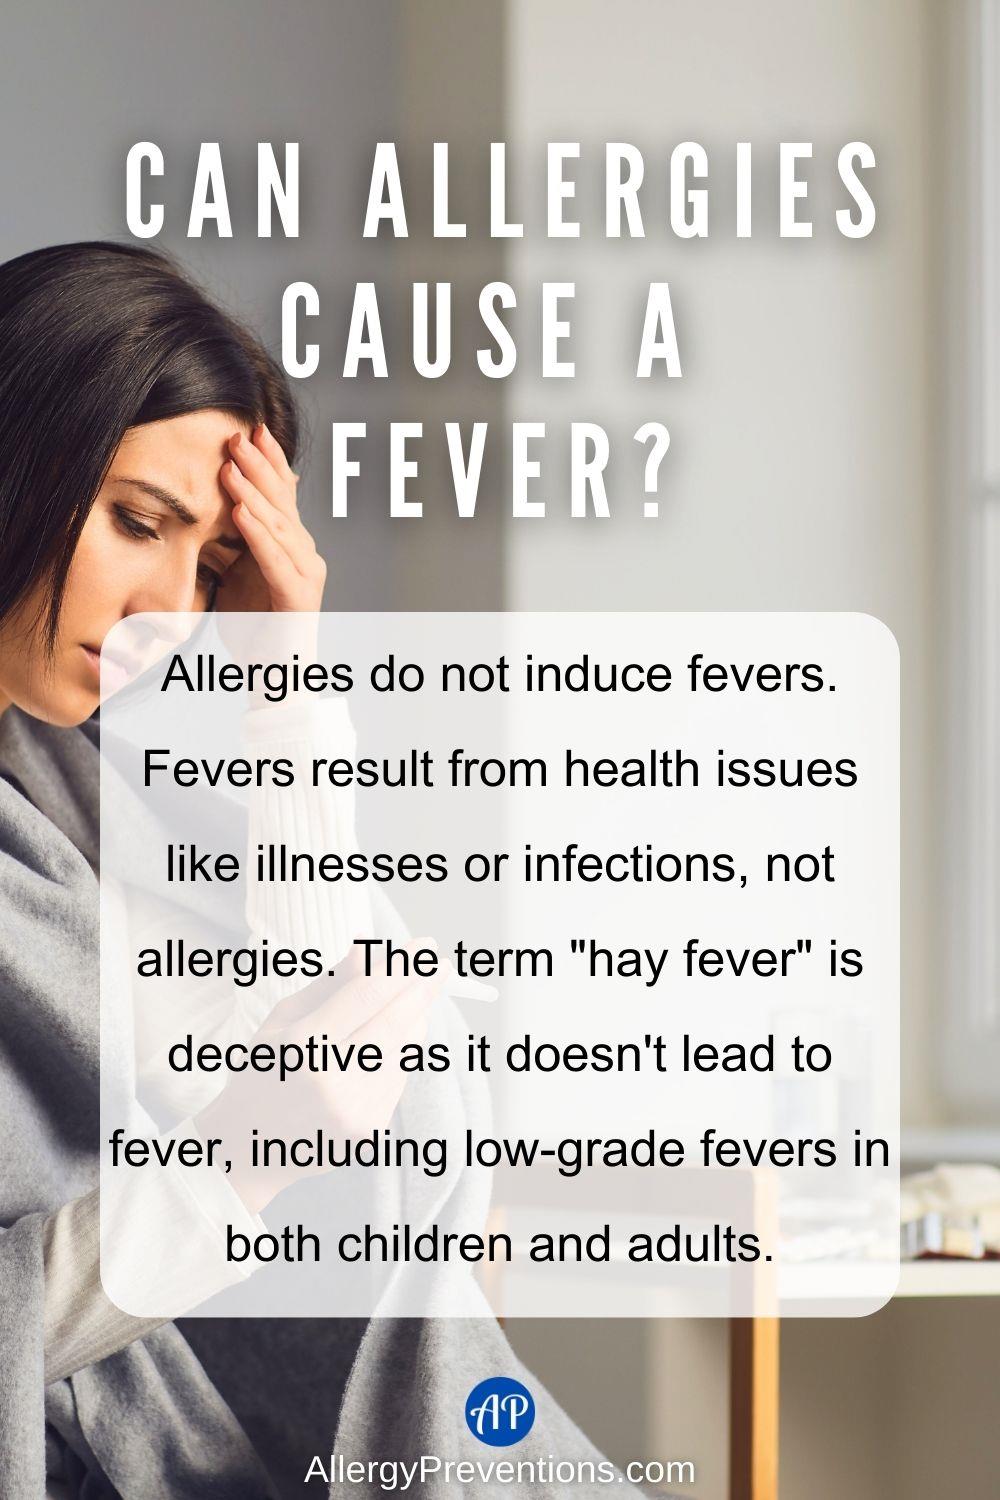 Can allergies cause a fever infographic. Allergies do not induce fevers. Fevers result from health issues like illnesses or infections, not allergies. The term "hay fever" is deceptive as it doesn't lead to fever, including low-grade fevers in both children and adults. learn more at allergypreventions.com